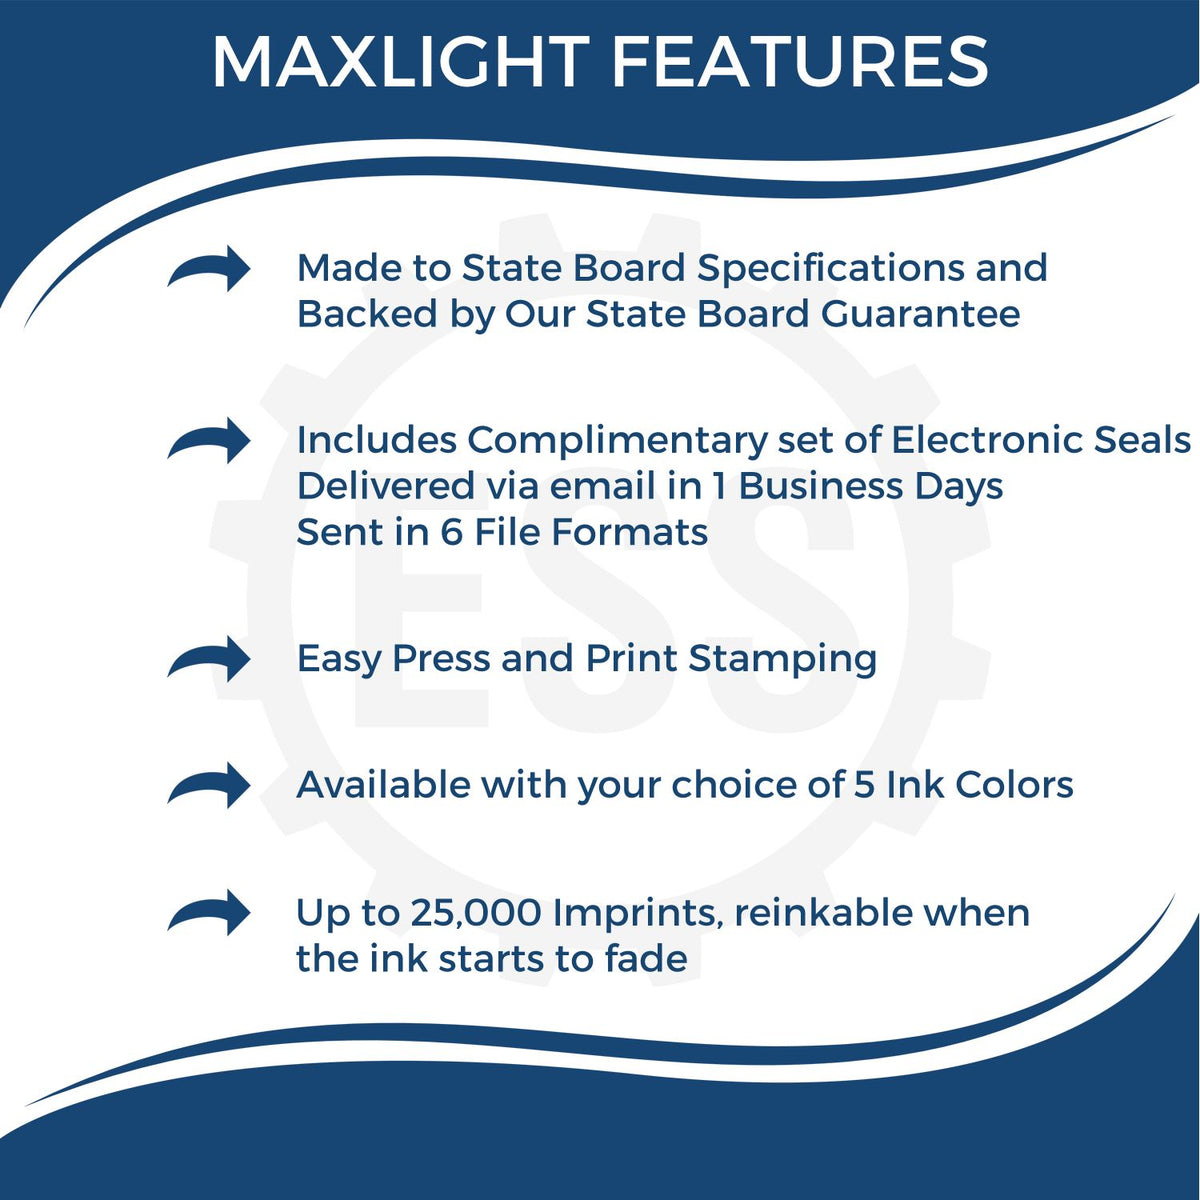 A picture of an infographic highlighting the selling points for the Premium MaxLight Pre-Inked Missouri Engineering Stamp